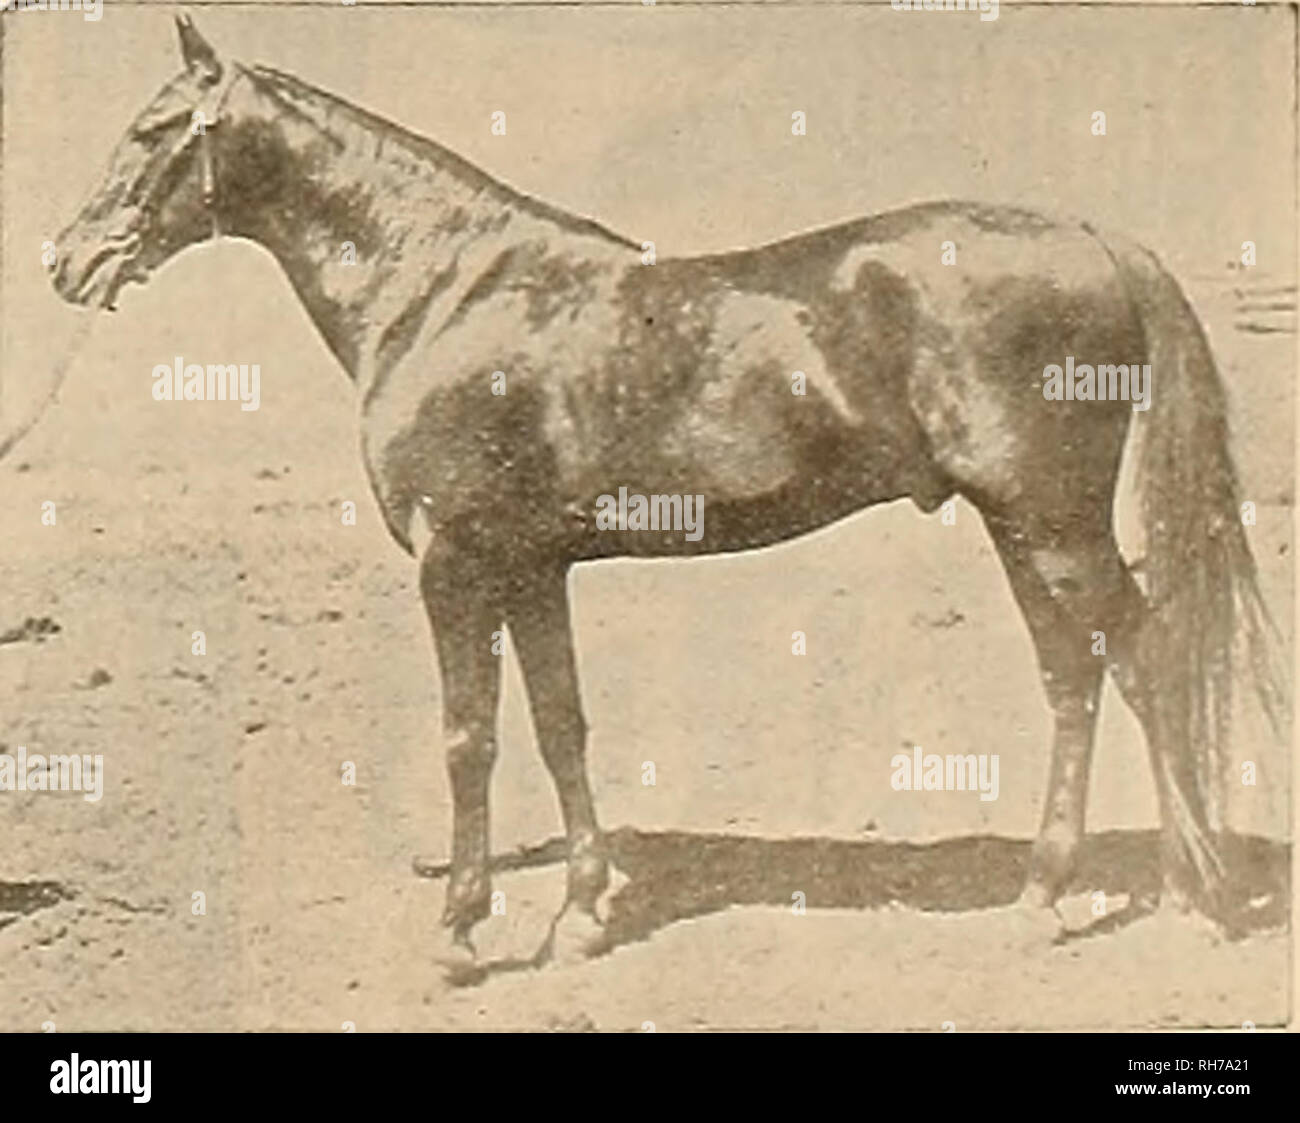 Breeder and sportsman. Horses. Sire of Prank Sweitzer £ Ha'.el Y Butcher Boy  Aud 1 tor and ten more in 2:ini/. .2:13« .2:17 .a:m-e of JOHN A. McKKRKON 2:05Vf  By GUY